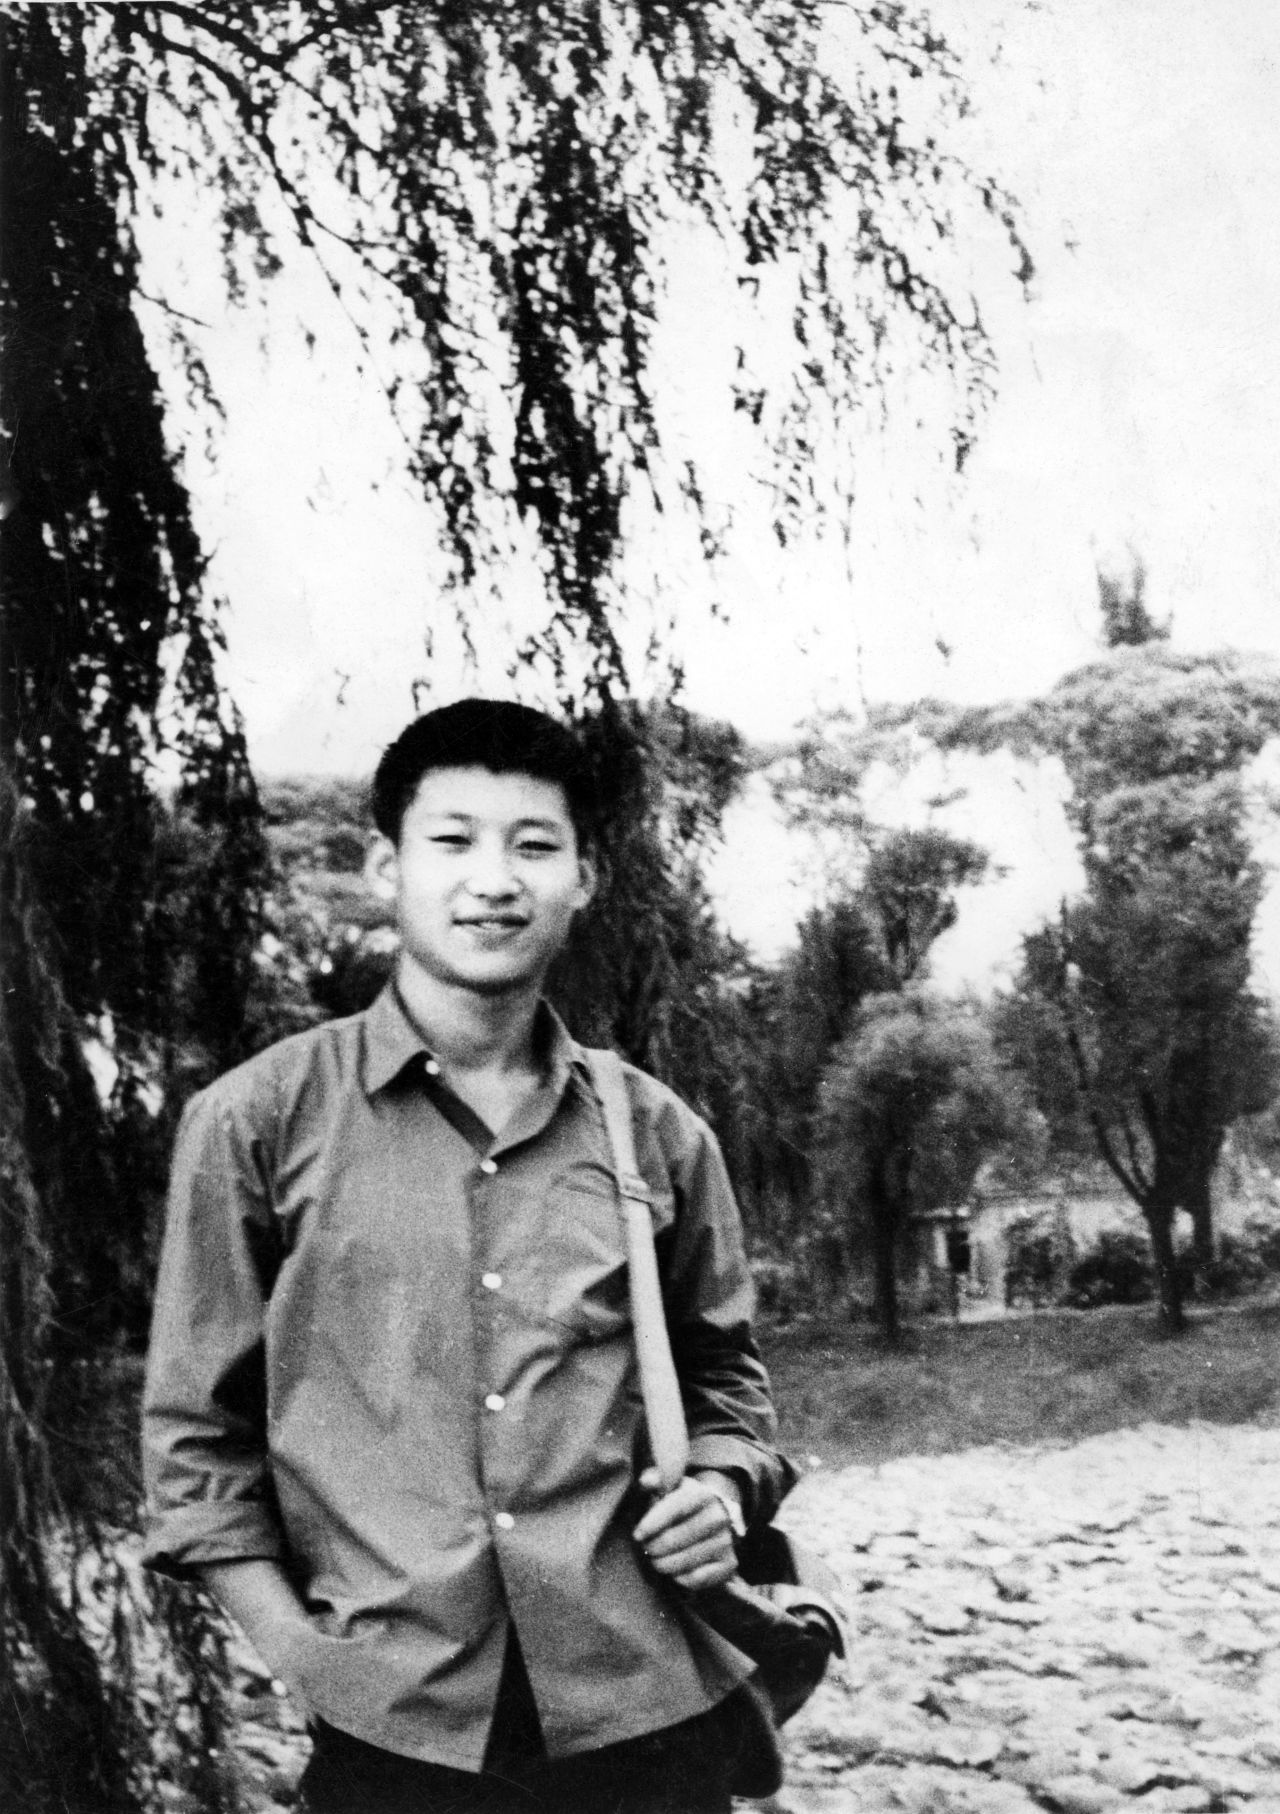 From 1969 to 1975, Xi worked as an agricultural laborer in Liangjiahe, China. He was among the millions of urban youths who were "sent down," forced to leave cities to work as laborers in the countryside.